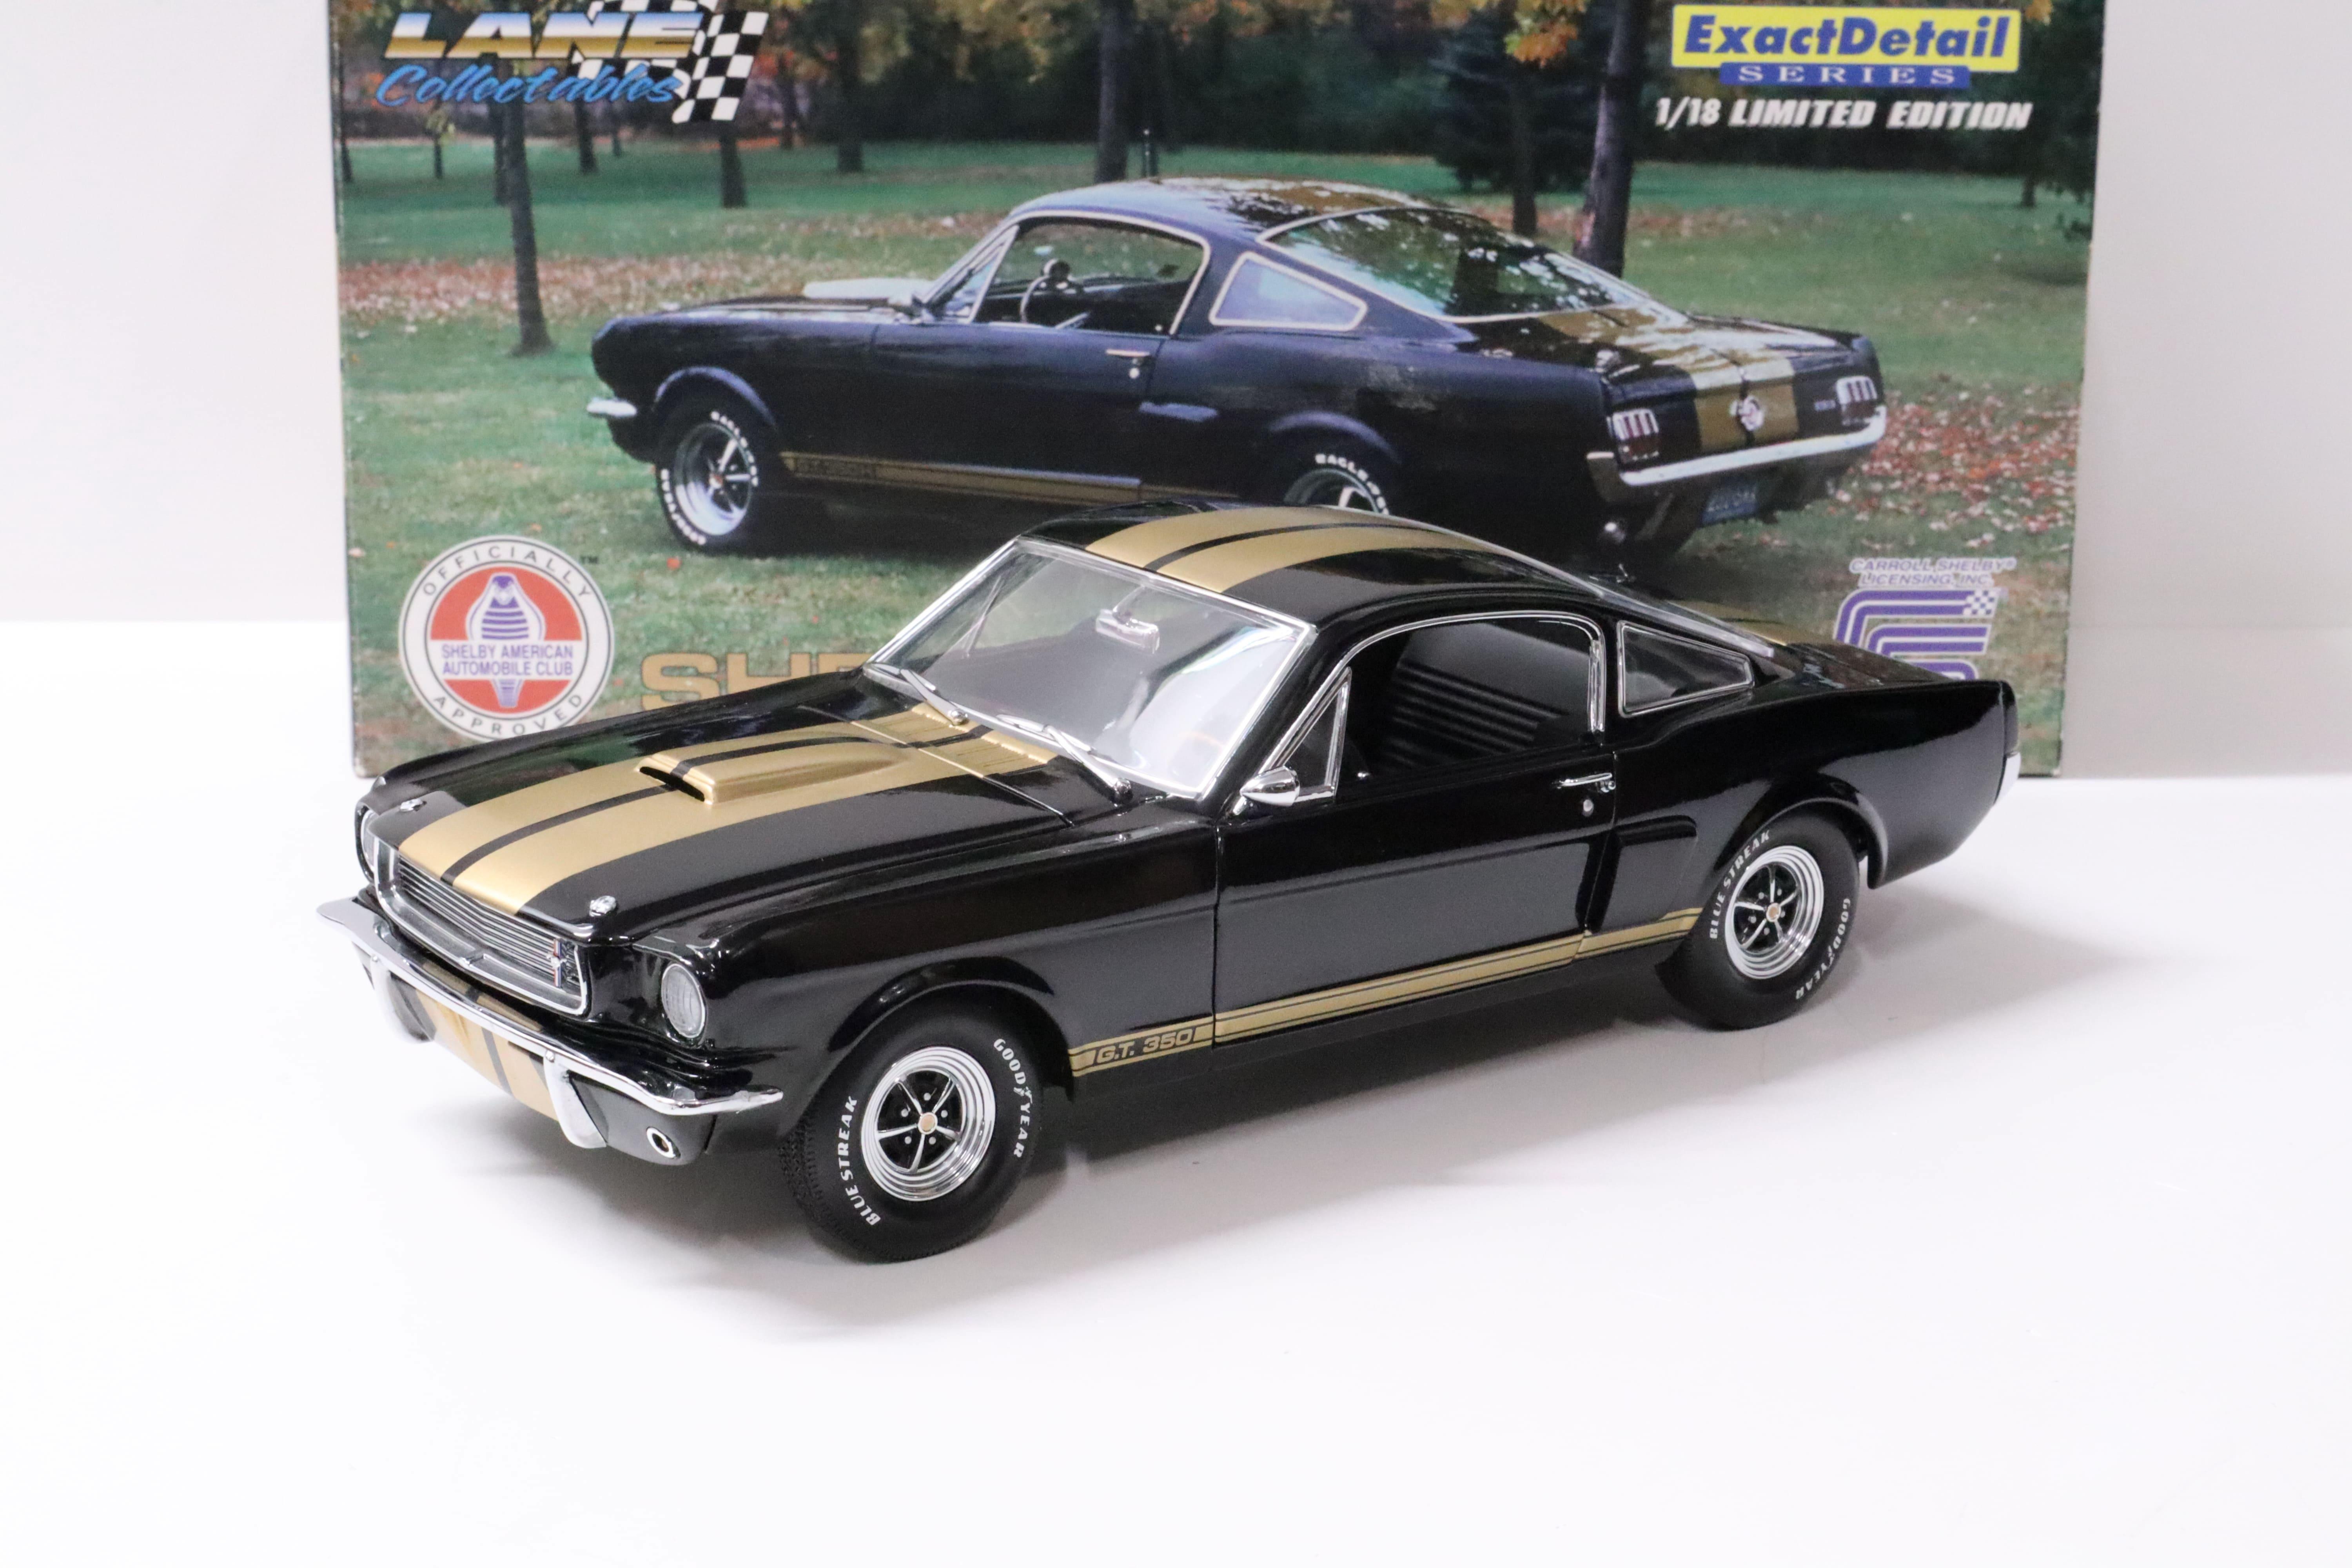 1:18 Exact Detail Shelby GT 350H Coupe 1966 black/ gold stripes